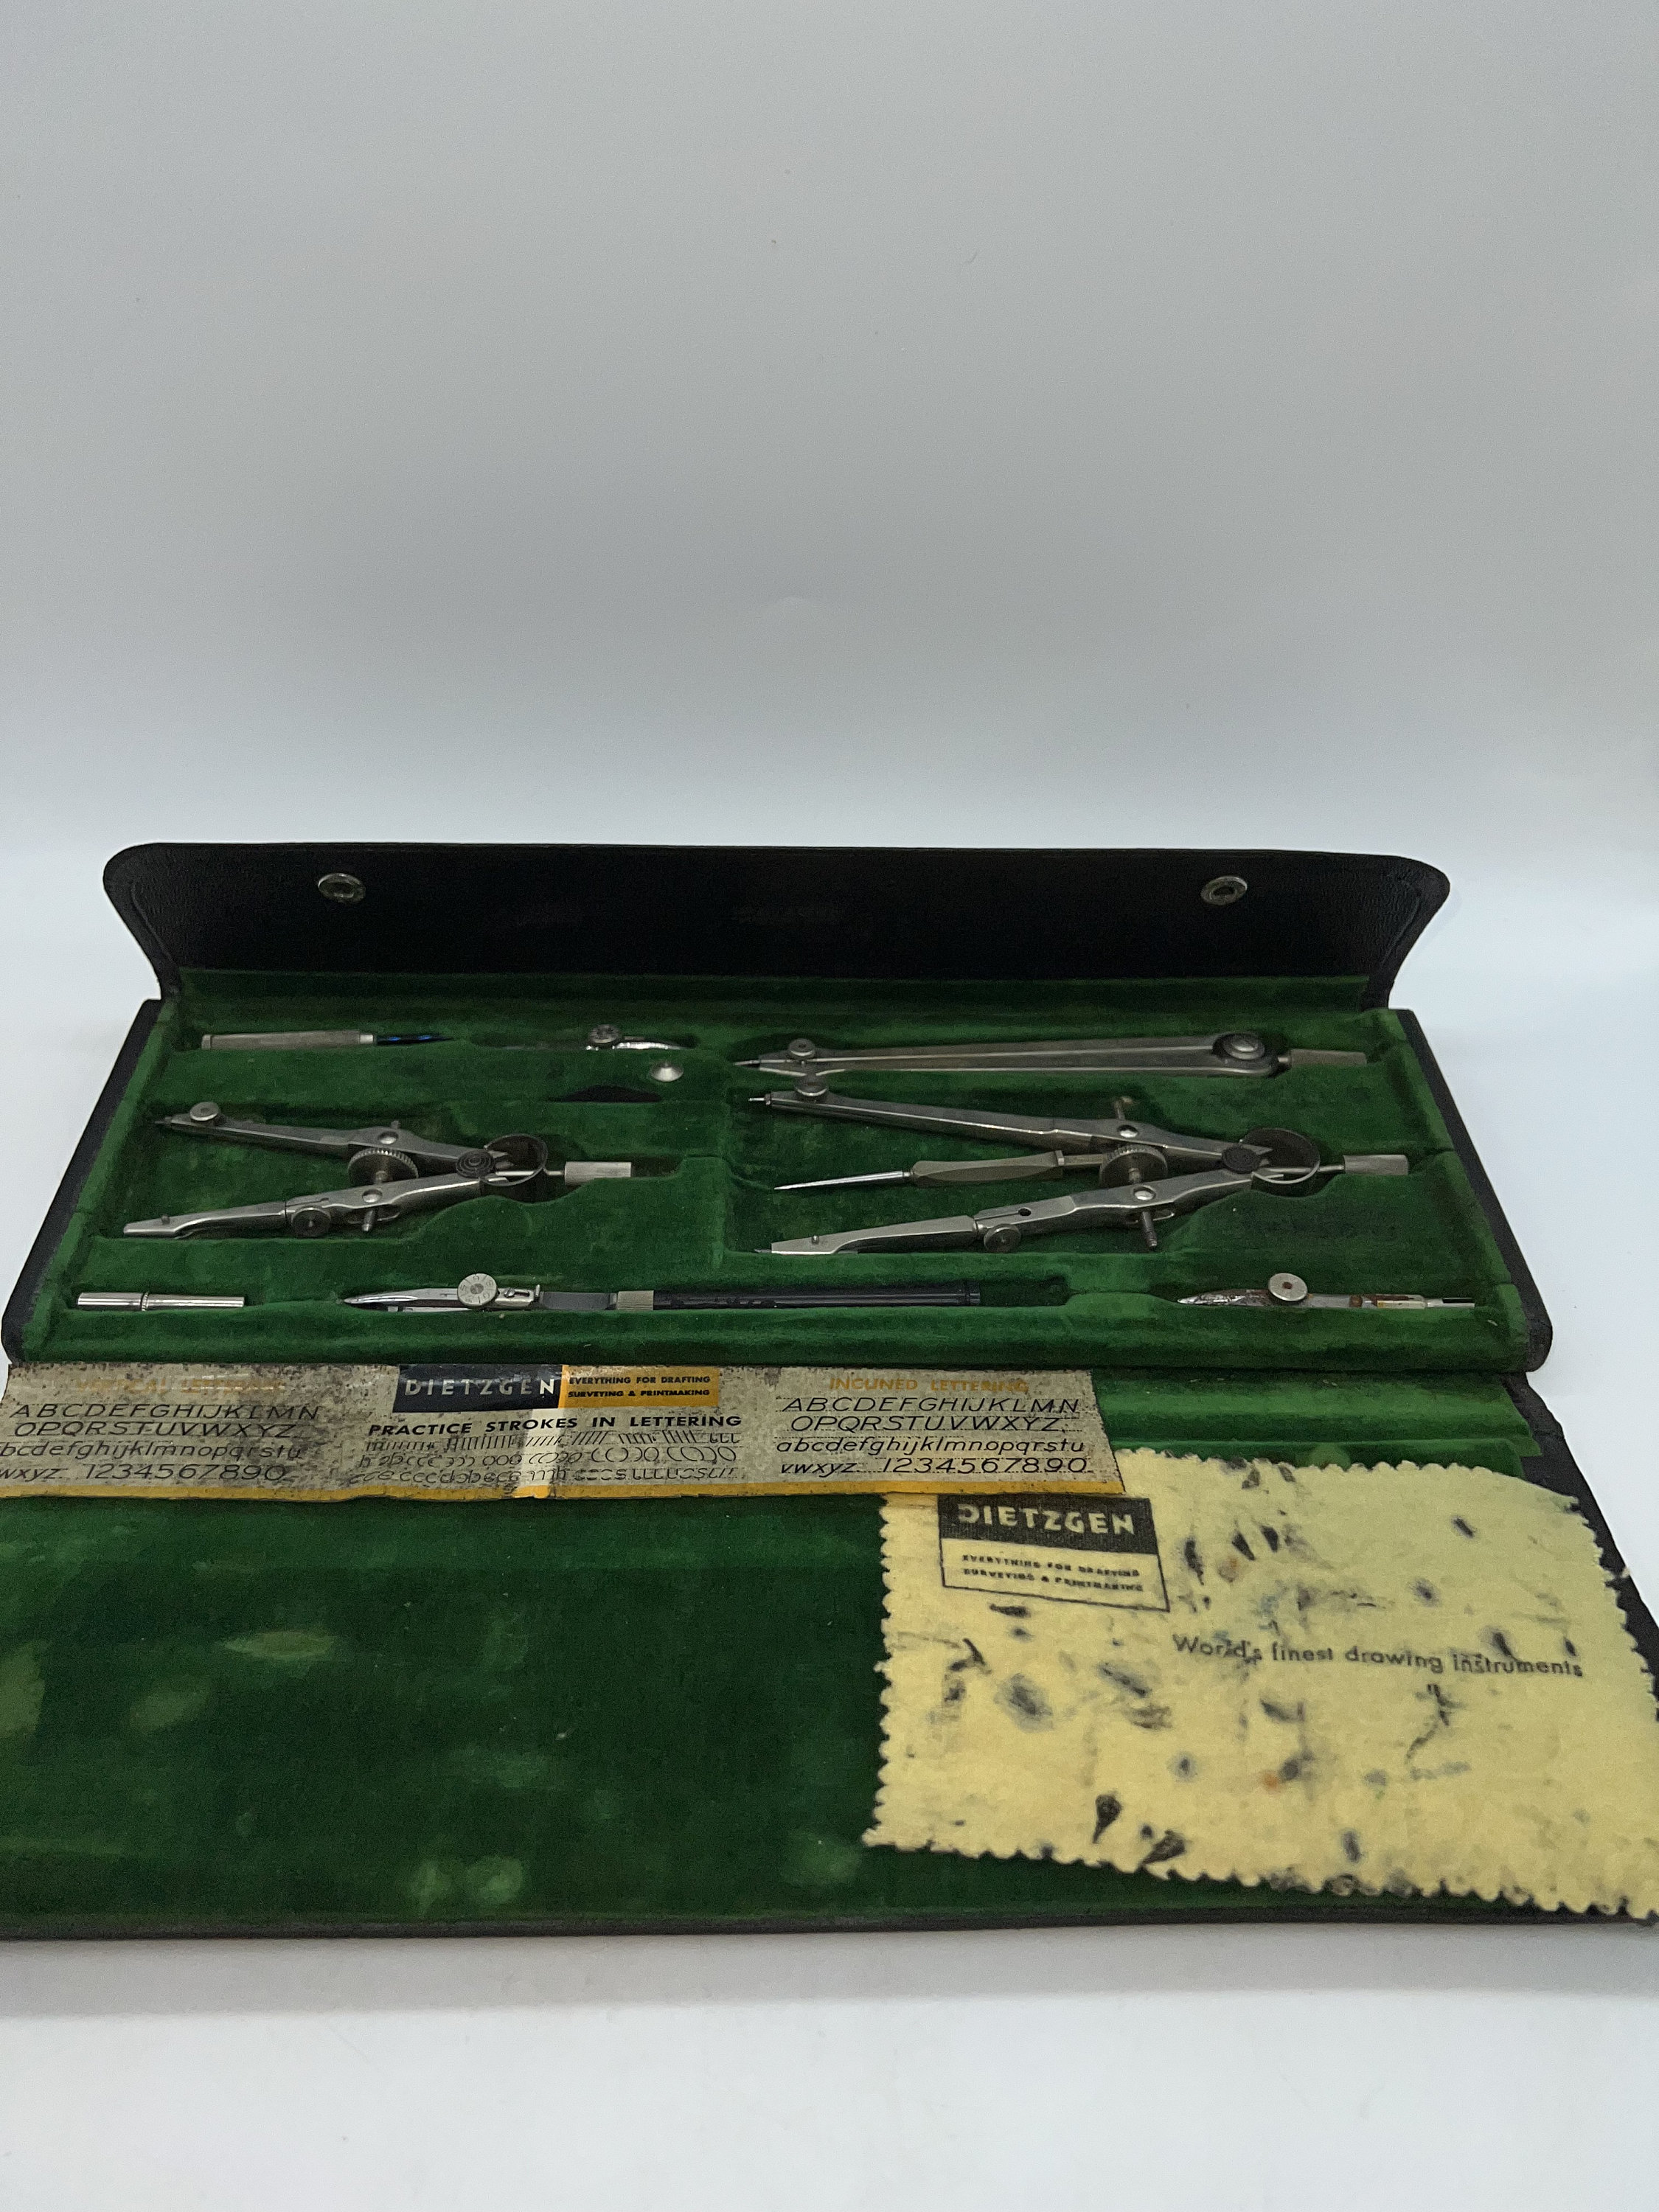 Antique Dietzgen Draftsmans Architects Engineers Drafting Tool Set Low S /  No R, #1991221561